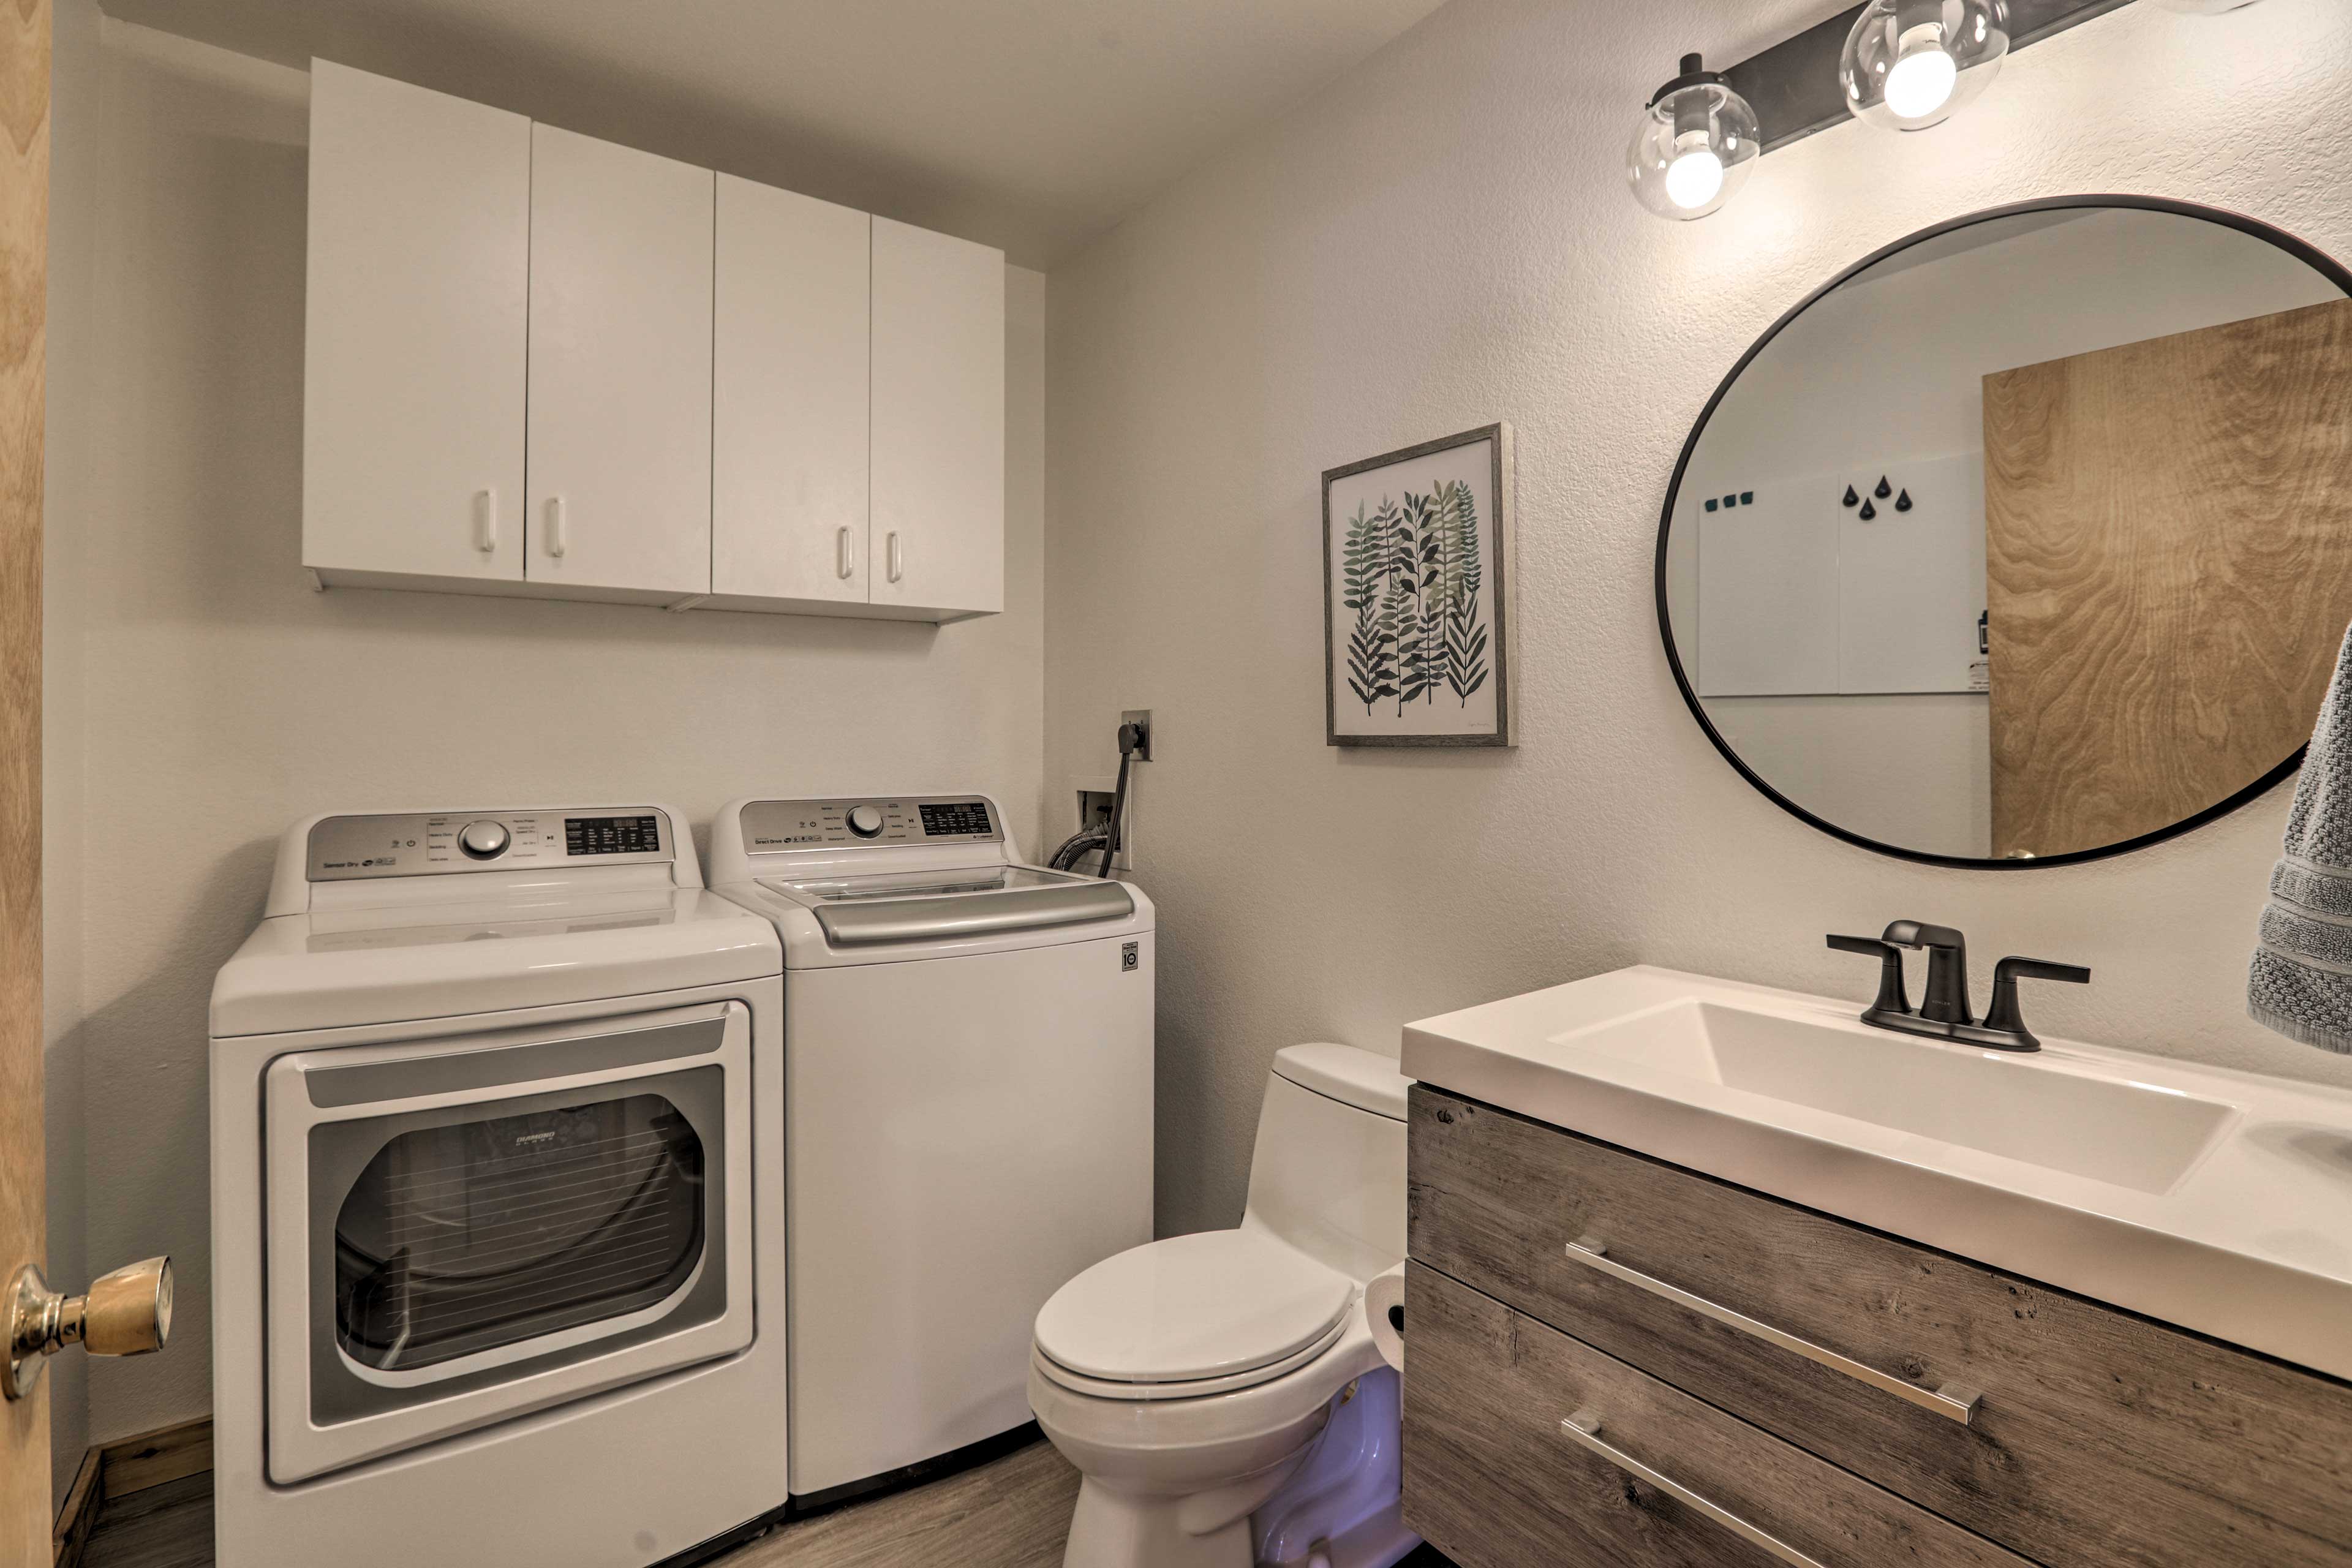 The half bathroom includes a washer and dryer.